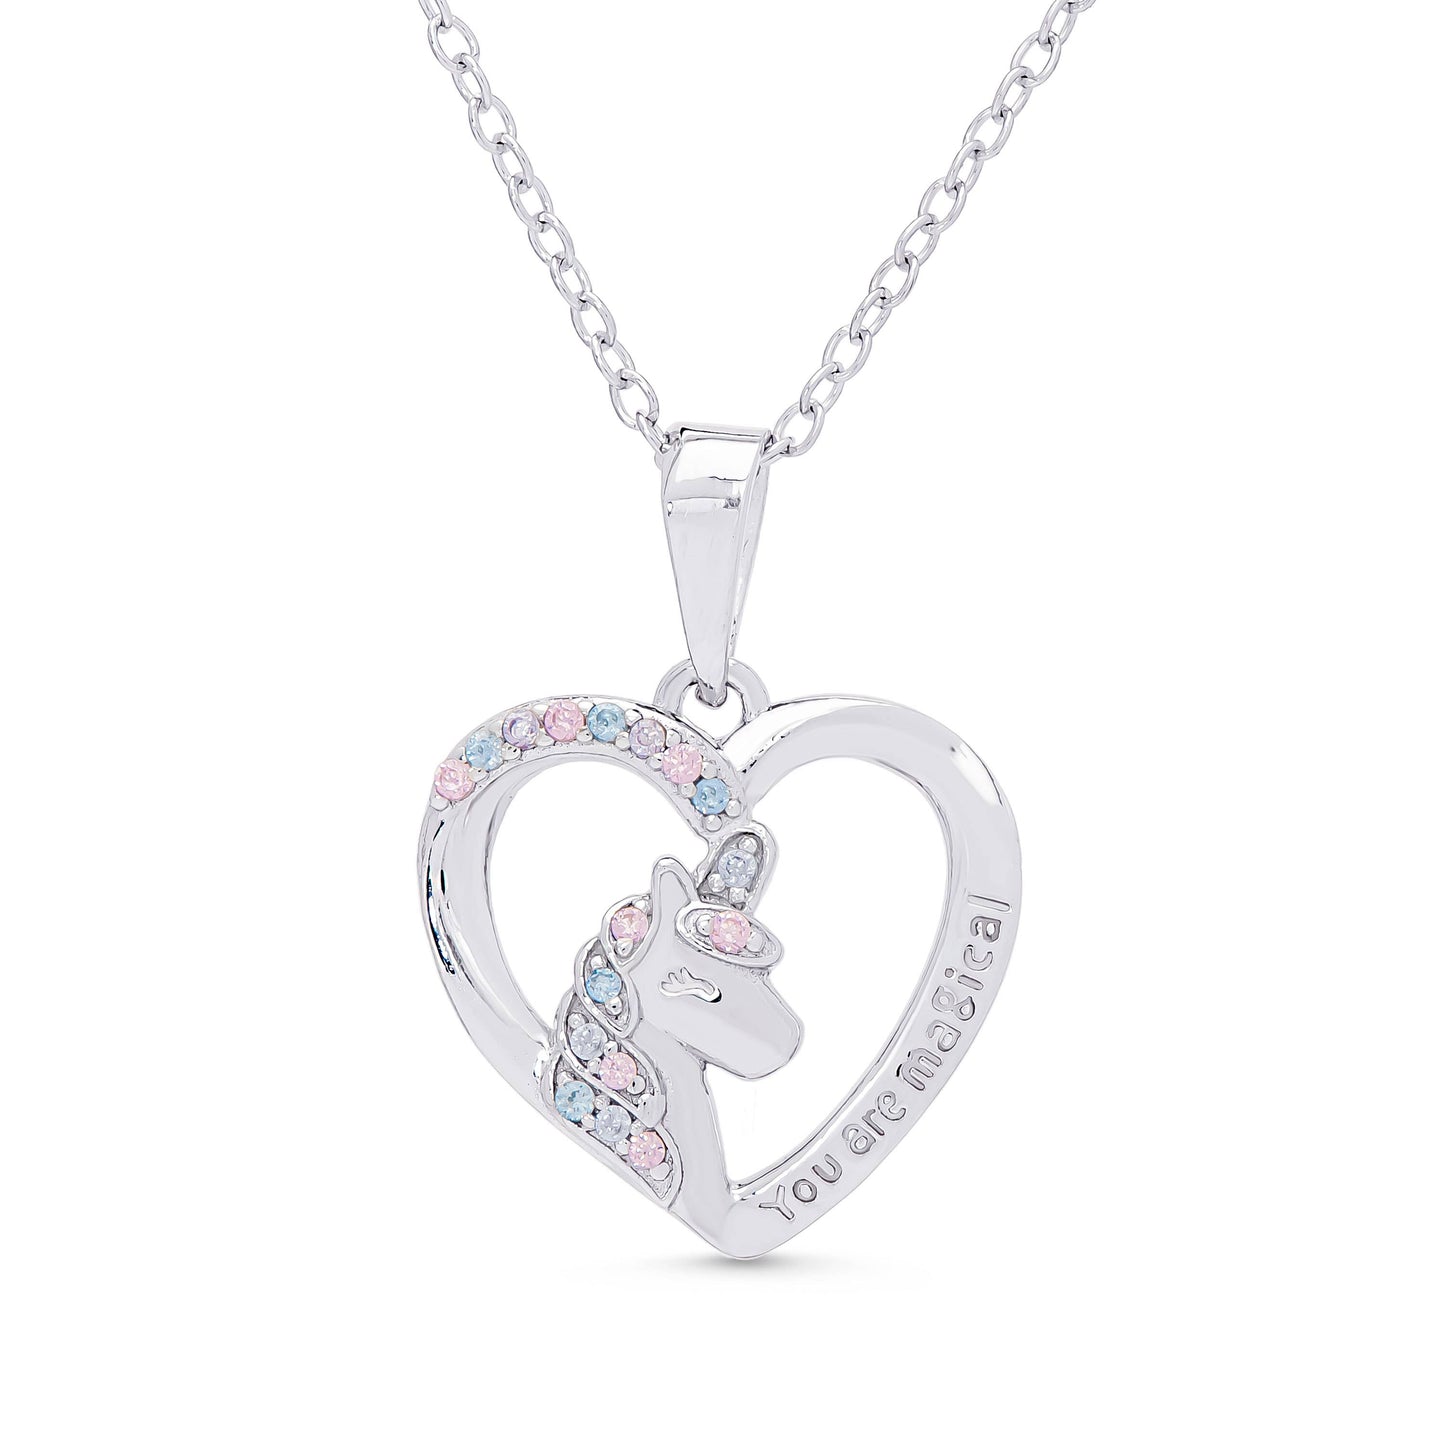 You Are Magical' Unicorn CZ Necklace in Sterling Silver